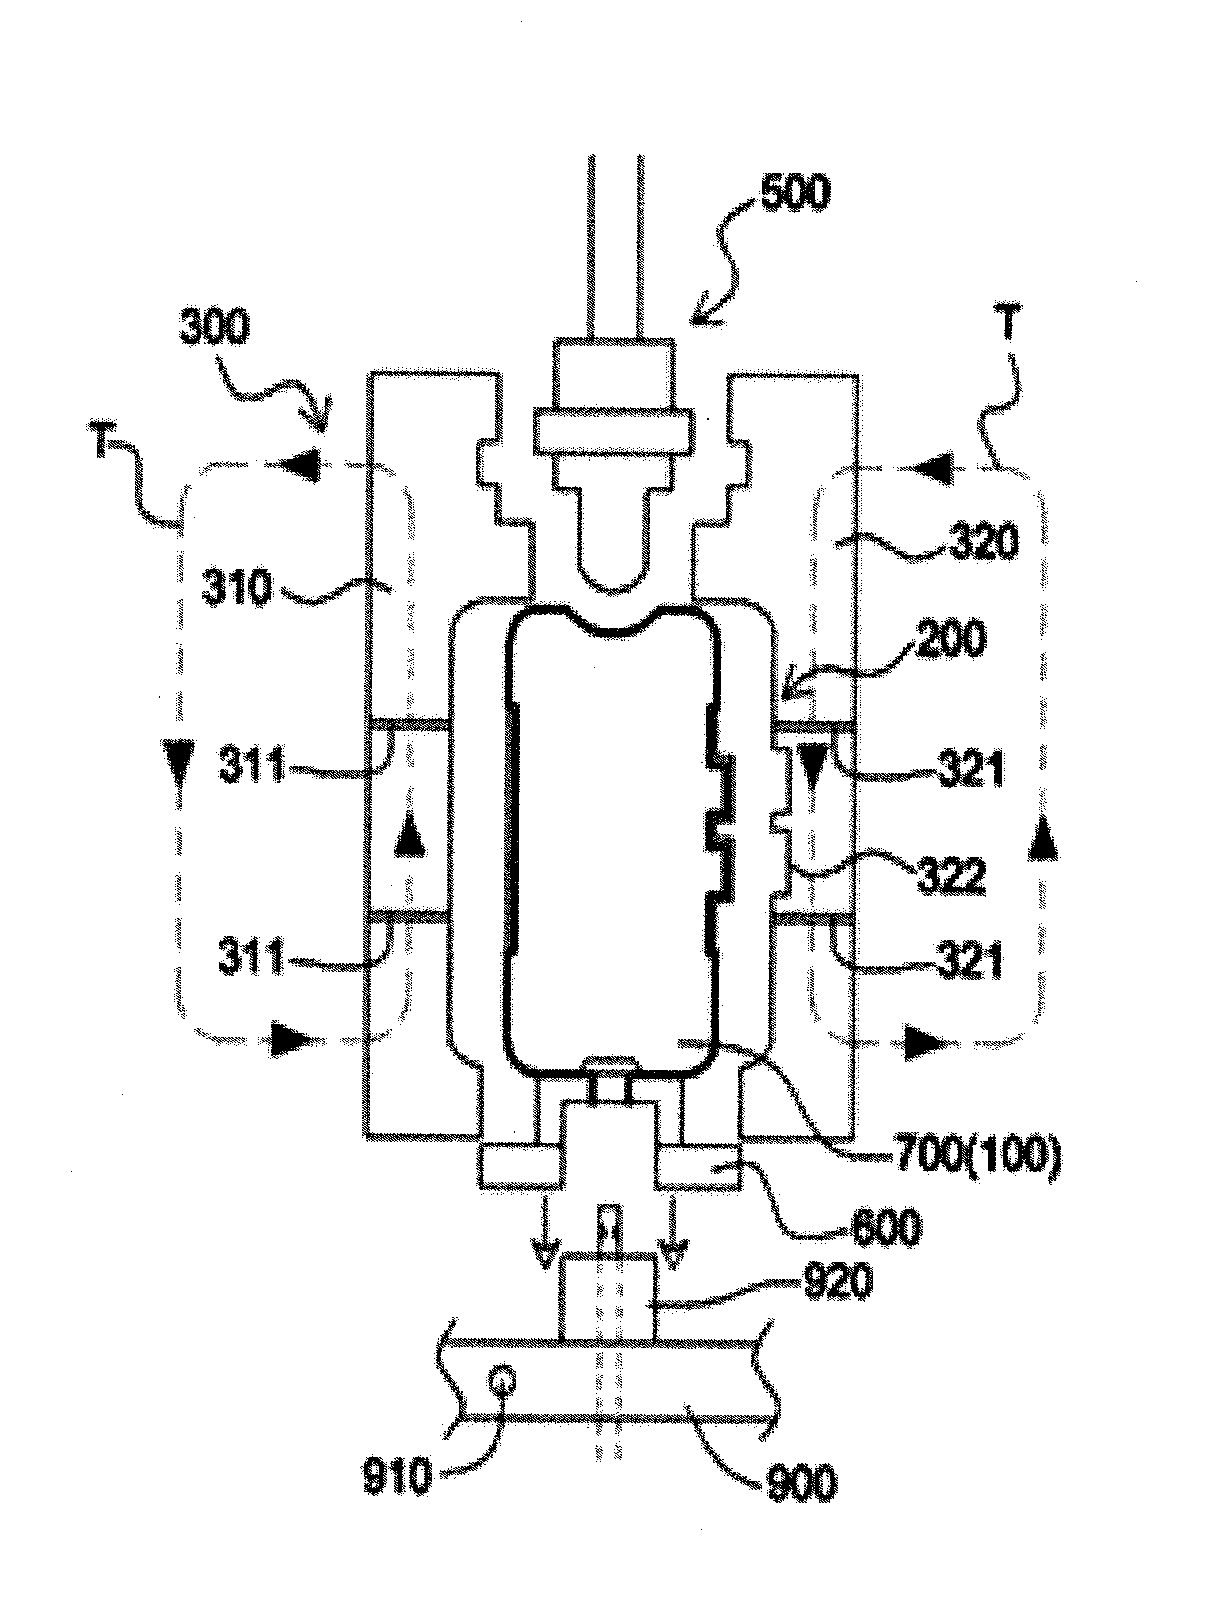 Manufacturing method of pressure container comprising in-mold label and three-dimensional shape